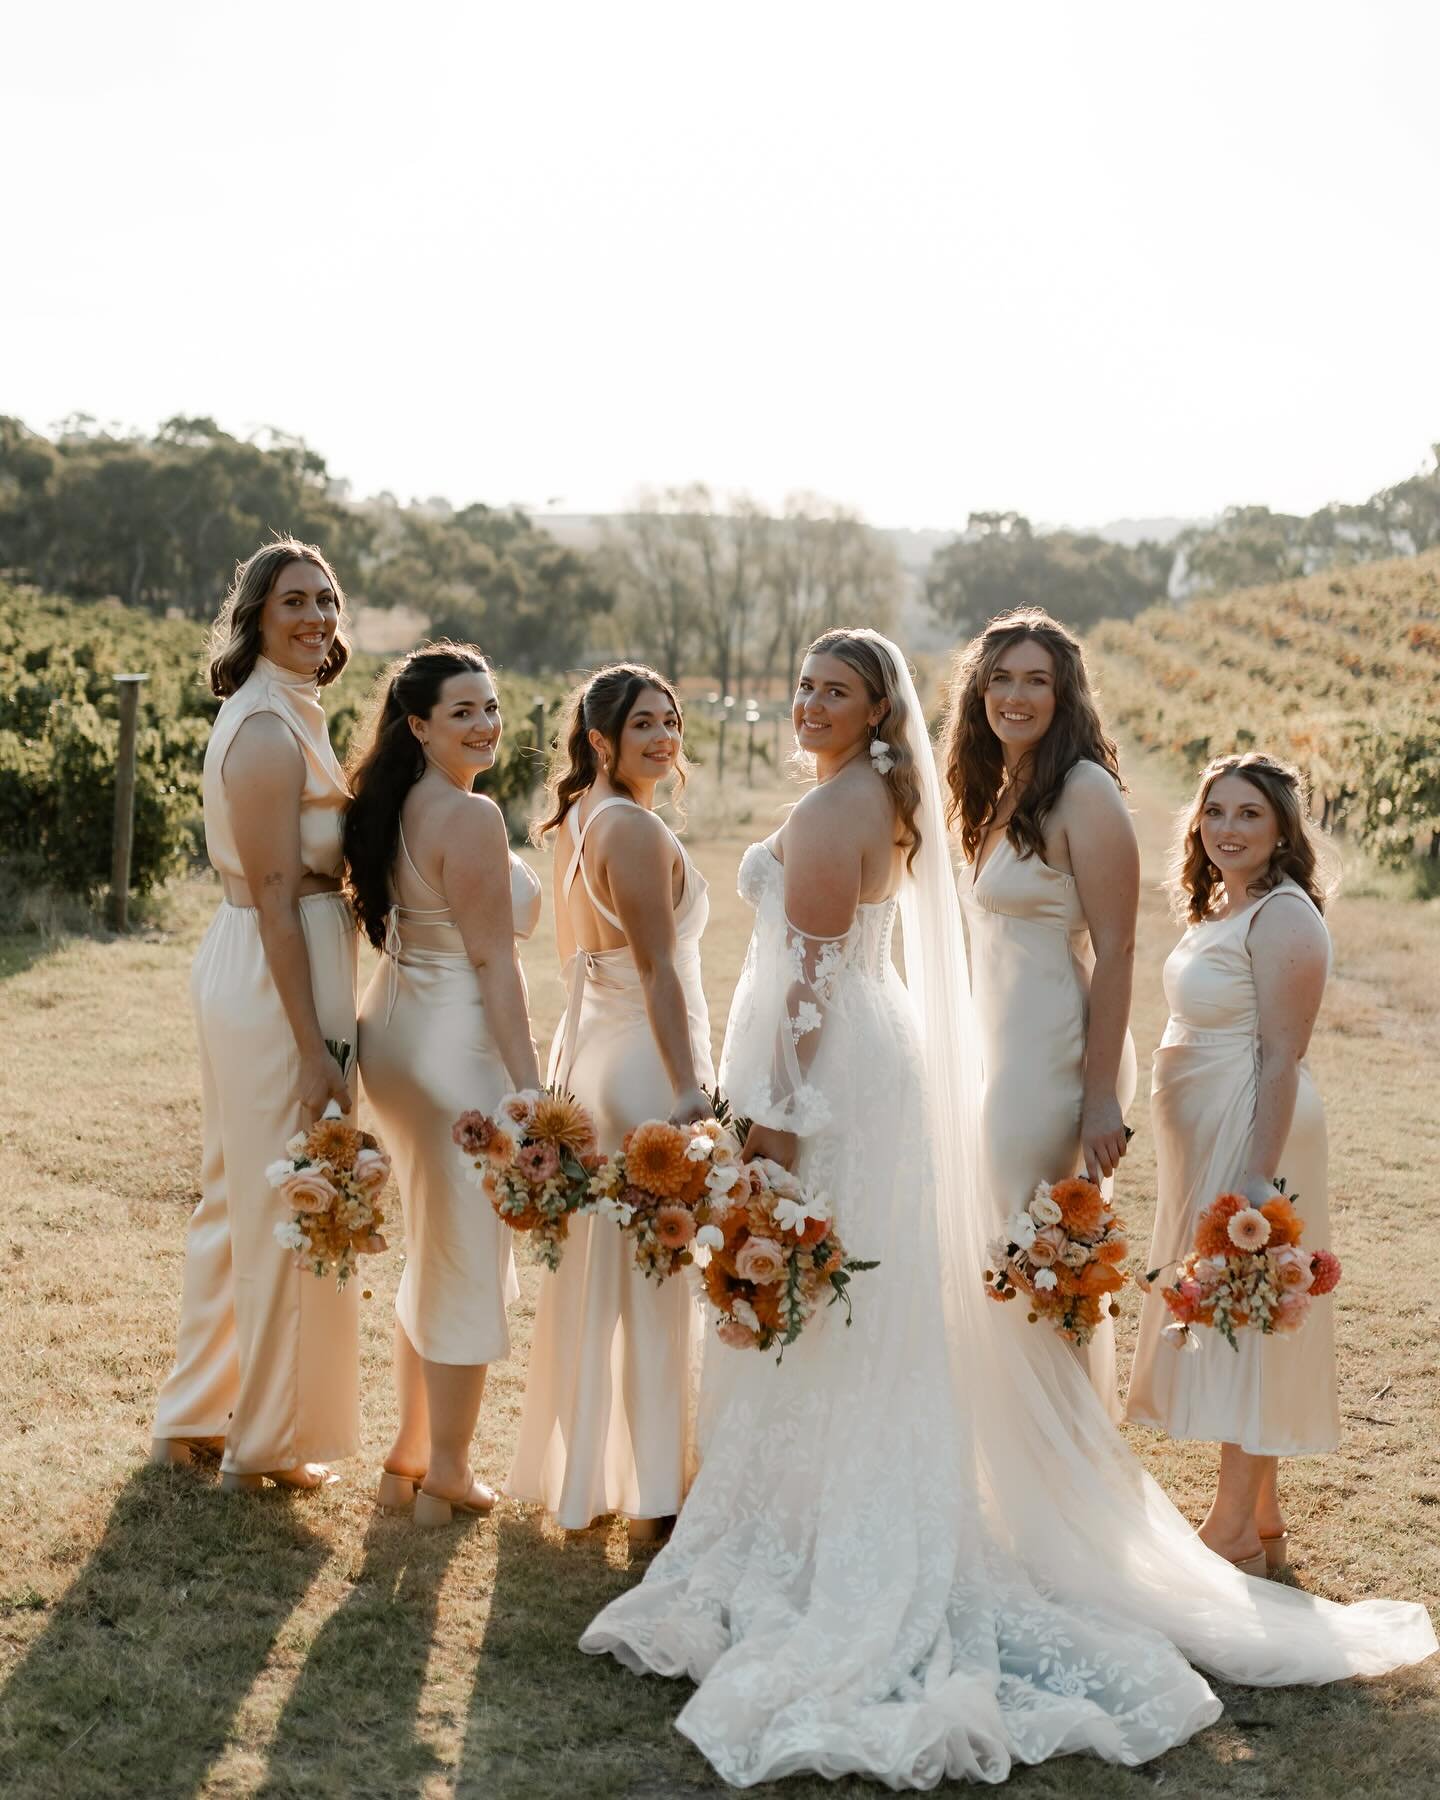 Annie + her bride tribe 💞🫶🏽

venue / @chapelhillwine @theretreatchapelhill 
photography / @lovewildweddings_ 
videography/ @lovewildweddings_ 
dress / @martinalianabridal 
hair + makeup / @lucyloves.beauty 
flowers / @etherealbotanica 
suits / @pe